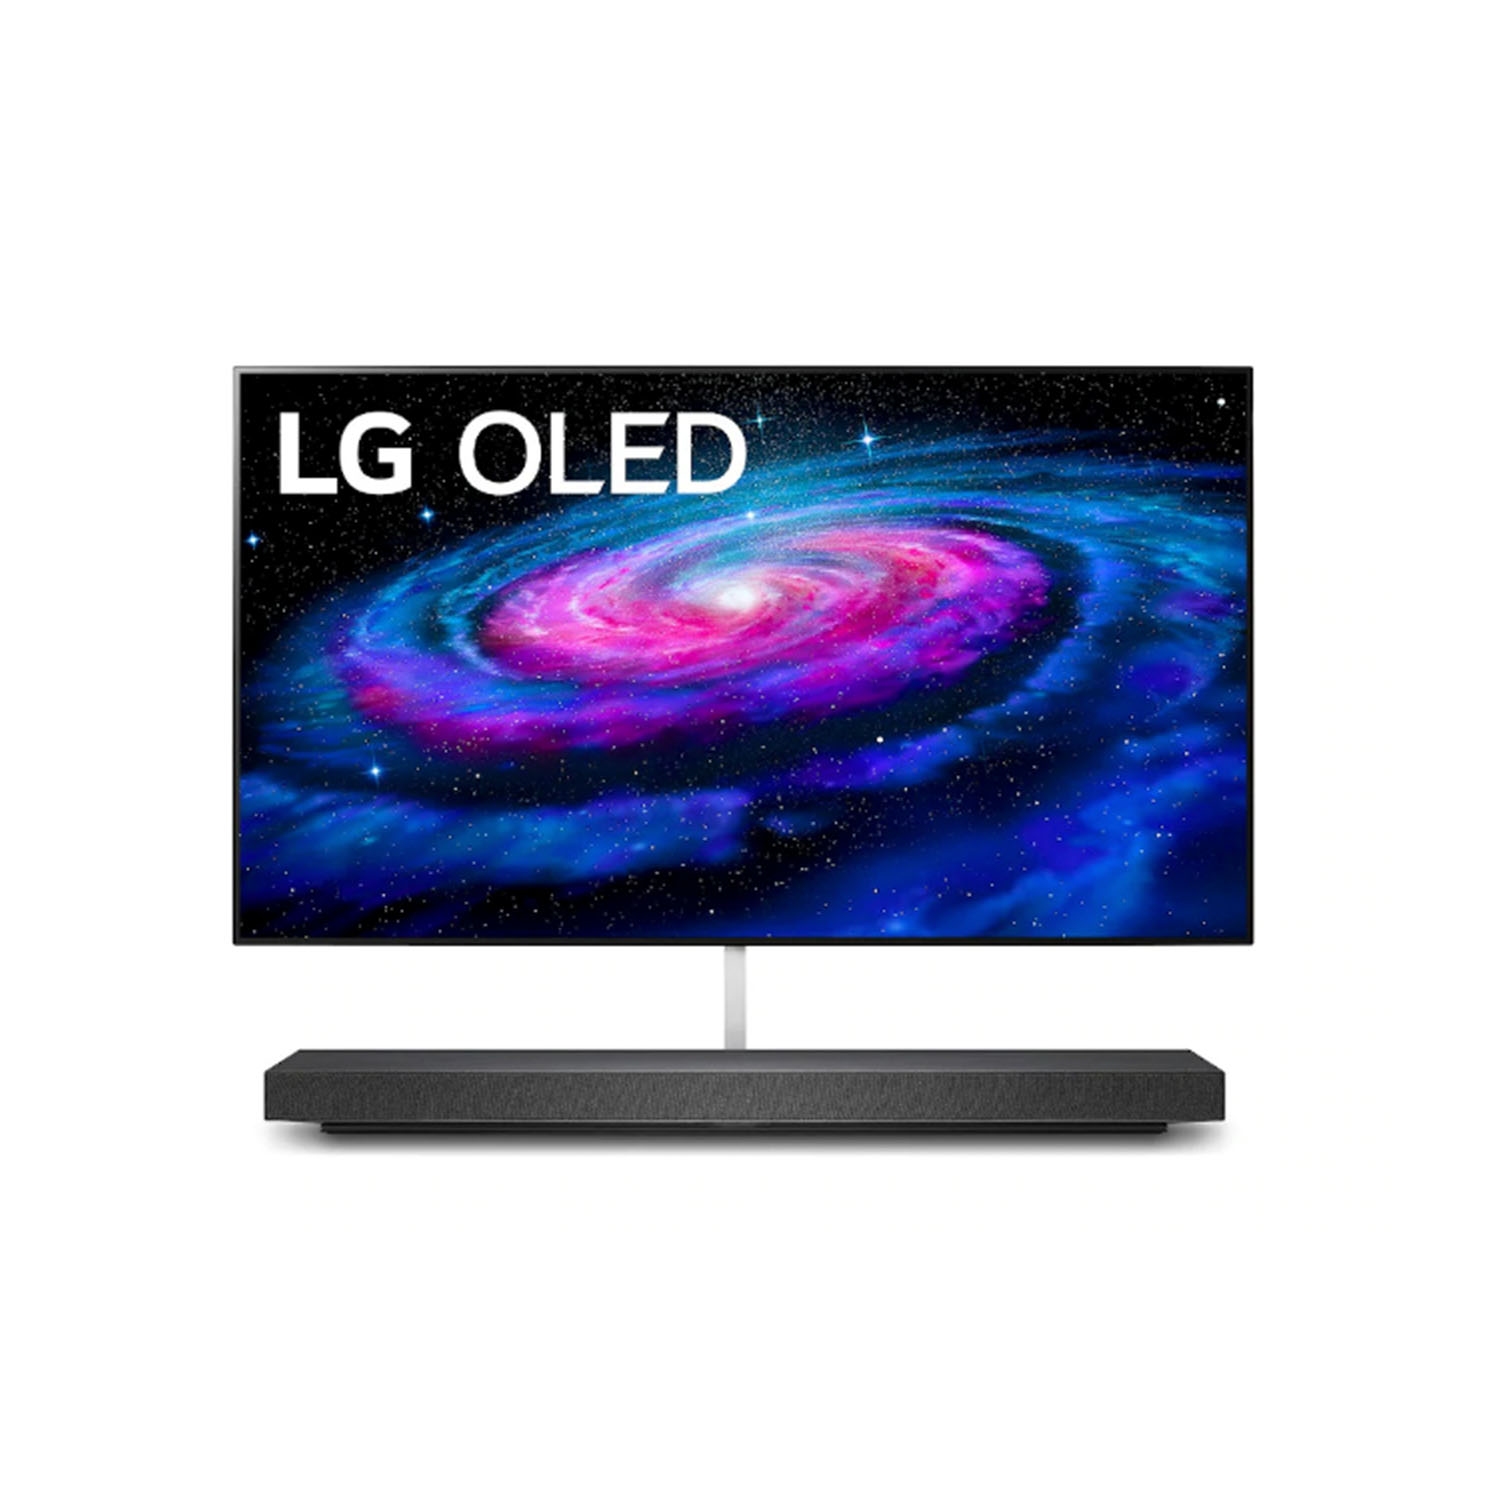 LG OLED65WX9LA 65" 4K Ultra HD OLED Smart TV with Dolby Vision & Dolby Atmos - 0